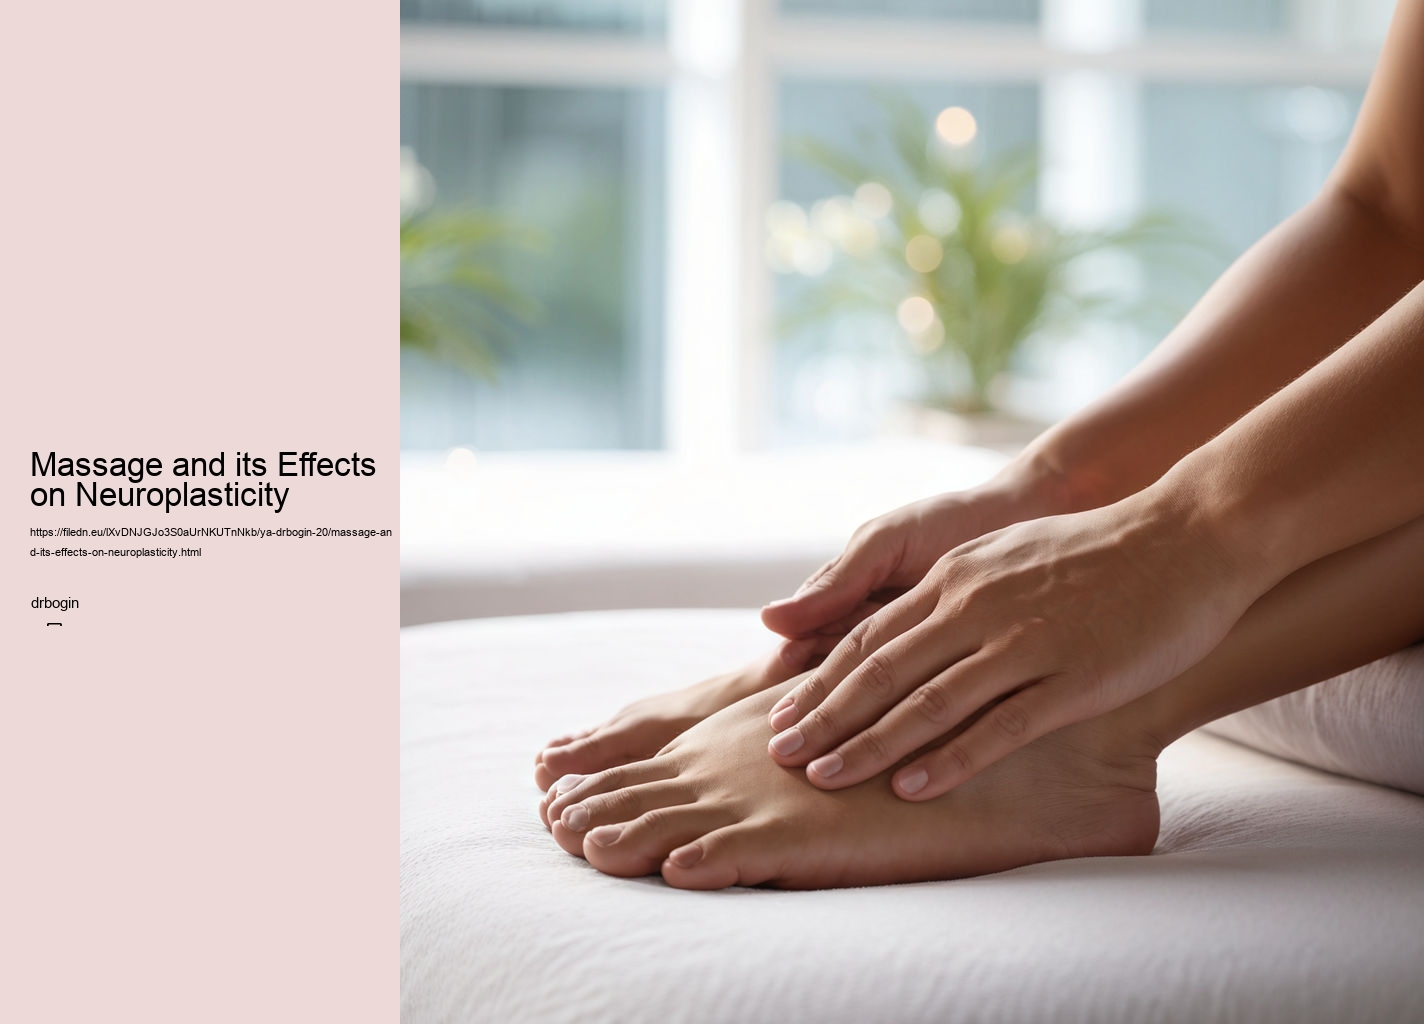 Massage and its Effects on Neuroplasticity